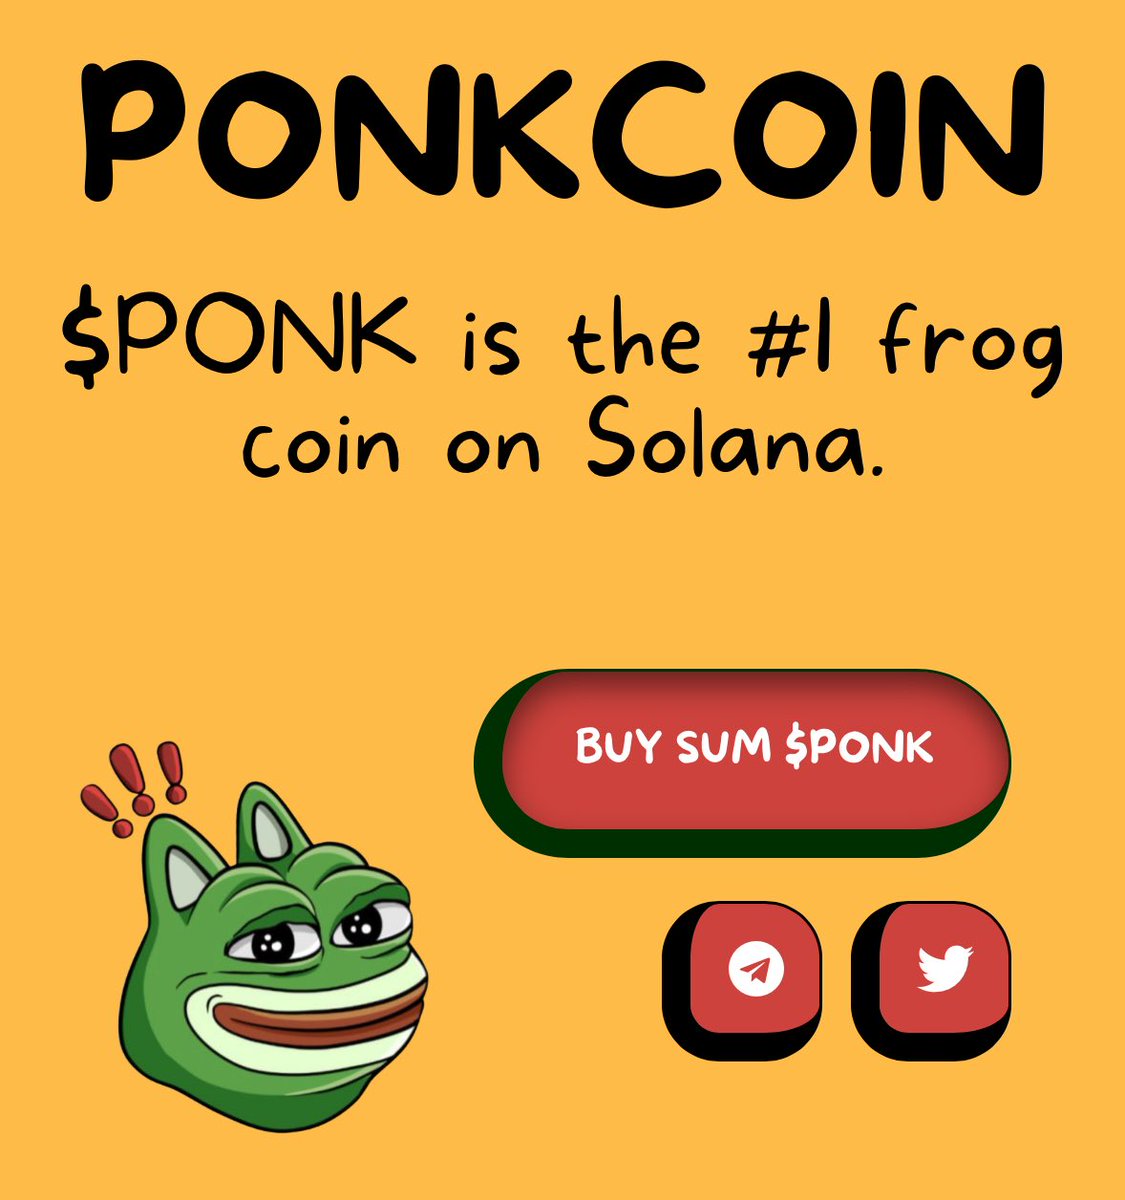 NEW WEBSITE $PONK 🐸

Checkout here 👉 ponkcoin.com